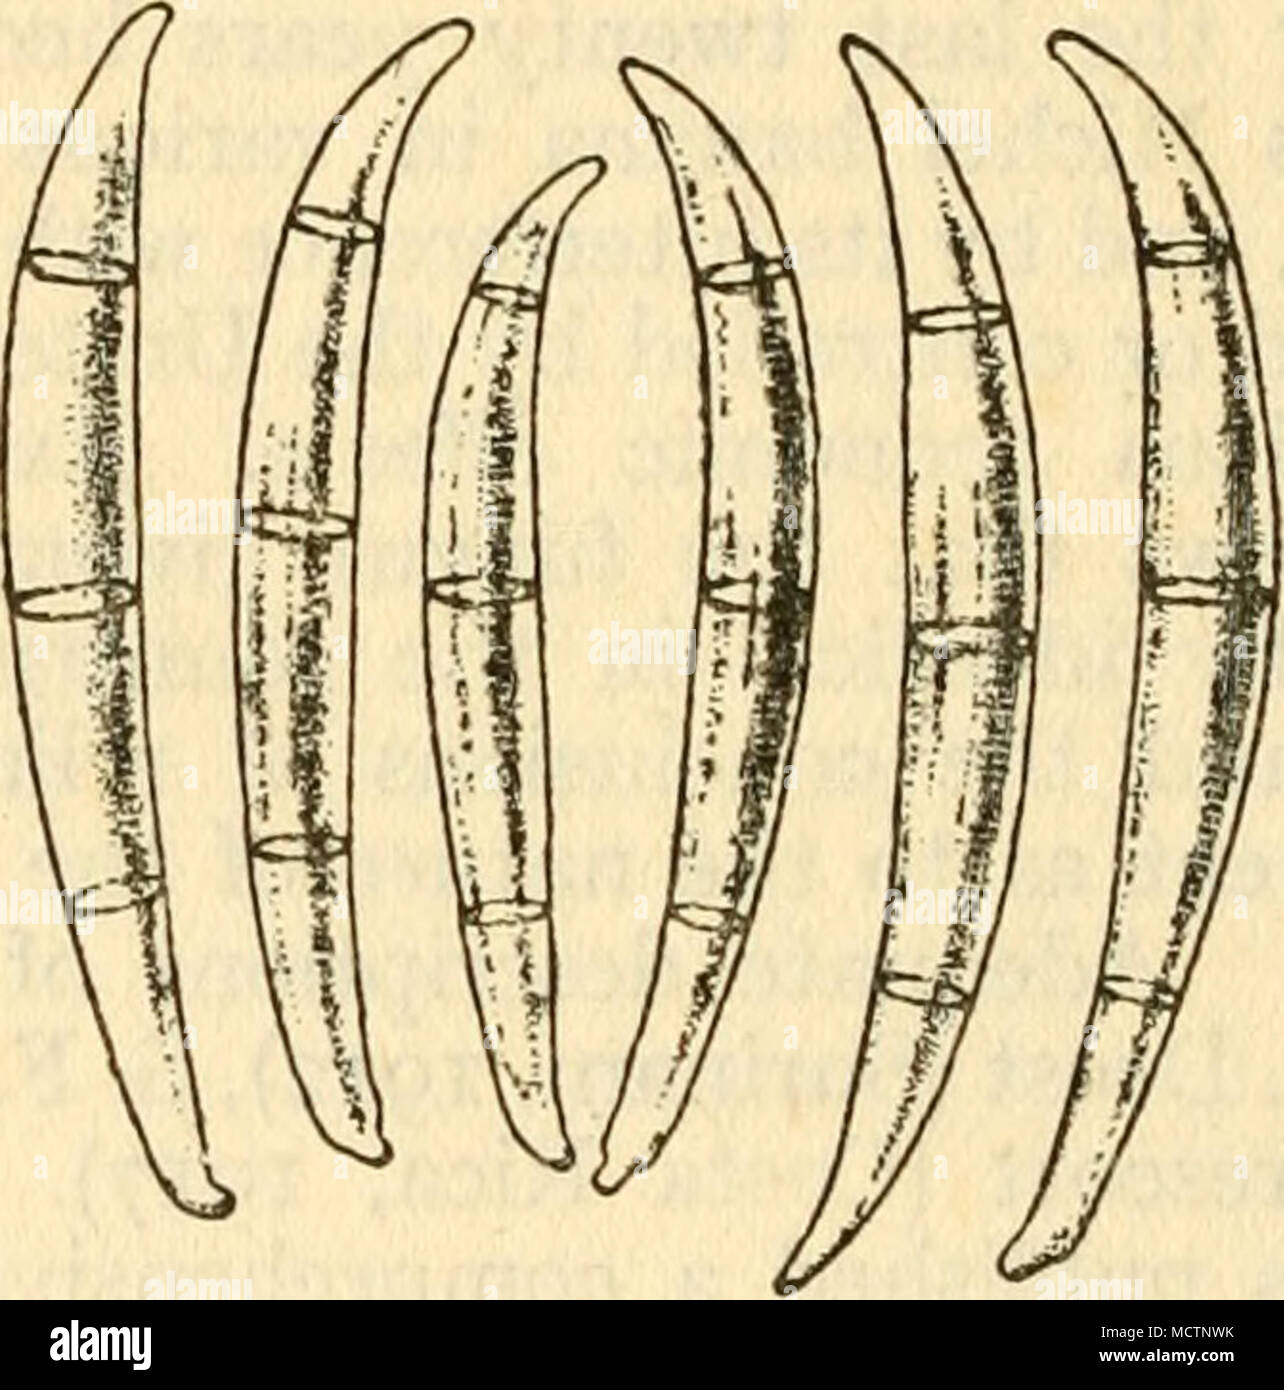 . Fig. 89 Macroconidia of Fusarium vasinfectum. Exactly like those of F. cuBENSE IN Size and Shape From a drawing by C. W. Carpenter in Journal of Agricultural Research be identical with Panama disease seriously affects the Gros Michel in St. Lucia. In Central America the disease is present in Panama, Costa Rica, Nicaragua, Guatemala, Honduras, and British Honduras. In South America it occurs in Surinam and British Guiana; there is no evidence of its existence in the large banana-growing districts of Colombia, which are irrigated. In India a disease which appears to correspond in all respects  Stock Photo